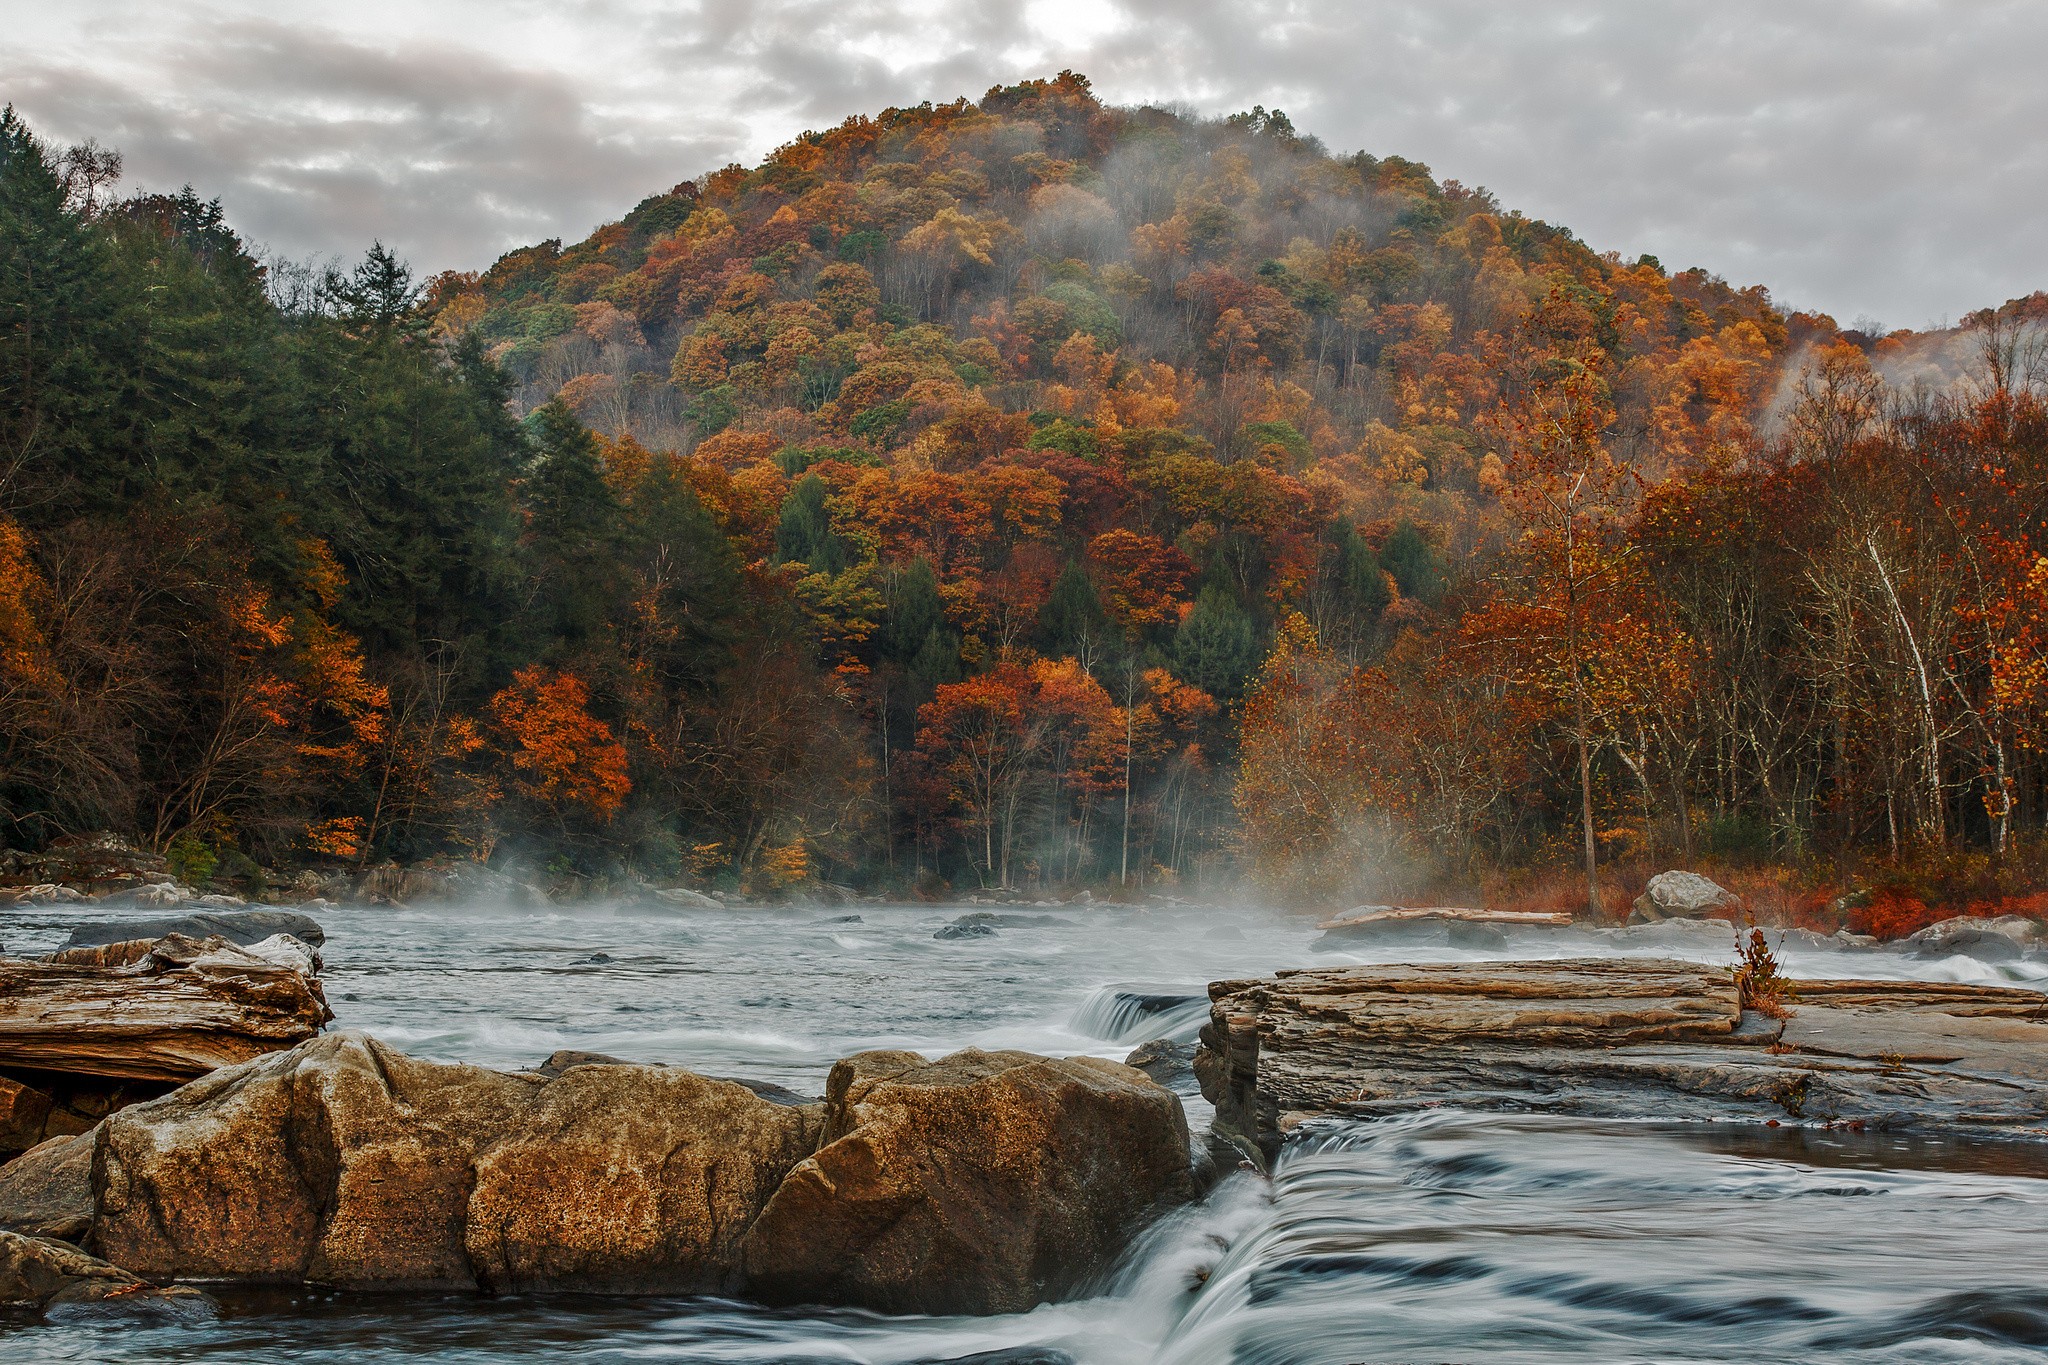 General 2048x1365 landscape mountains river mist fall hills red leaves nature trees